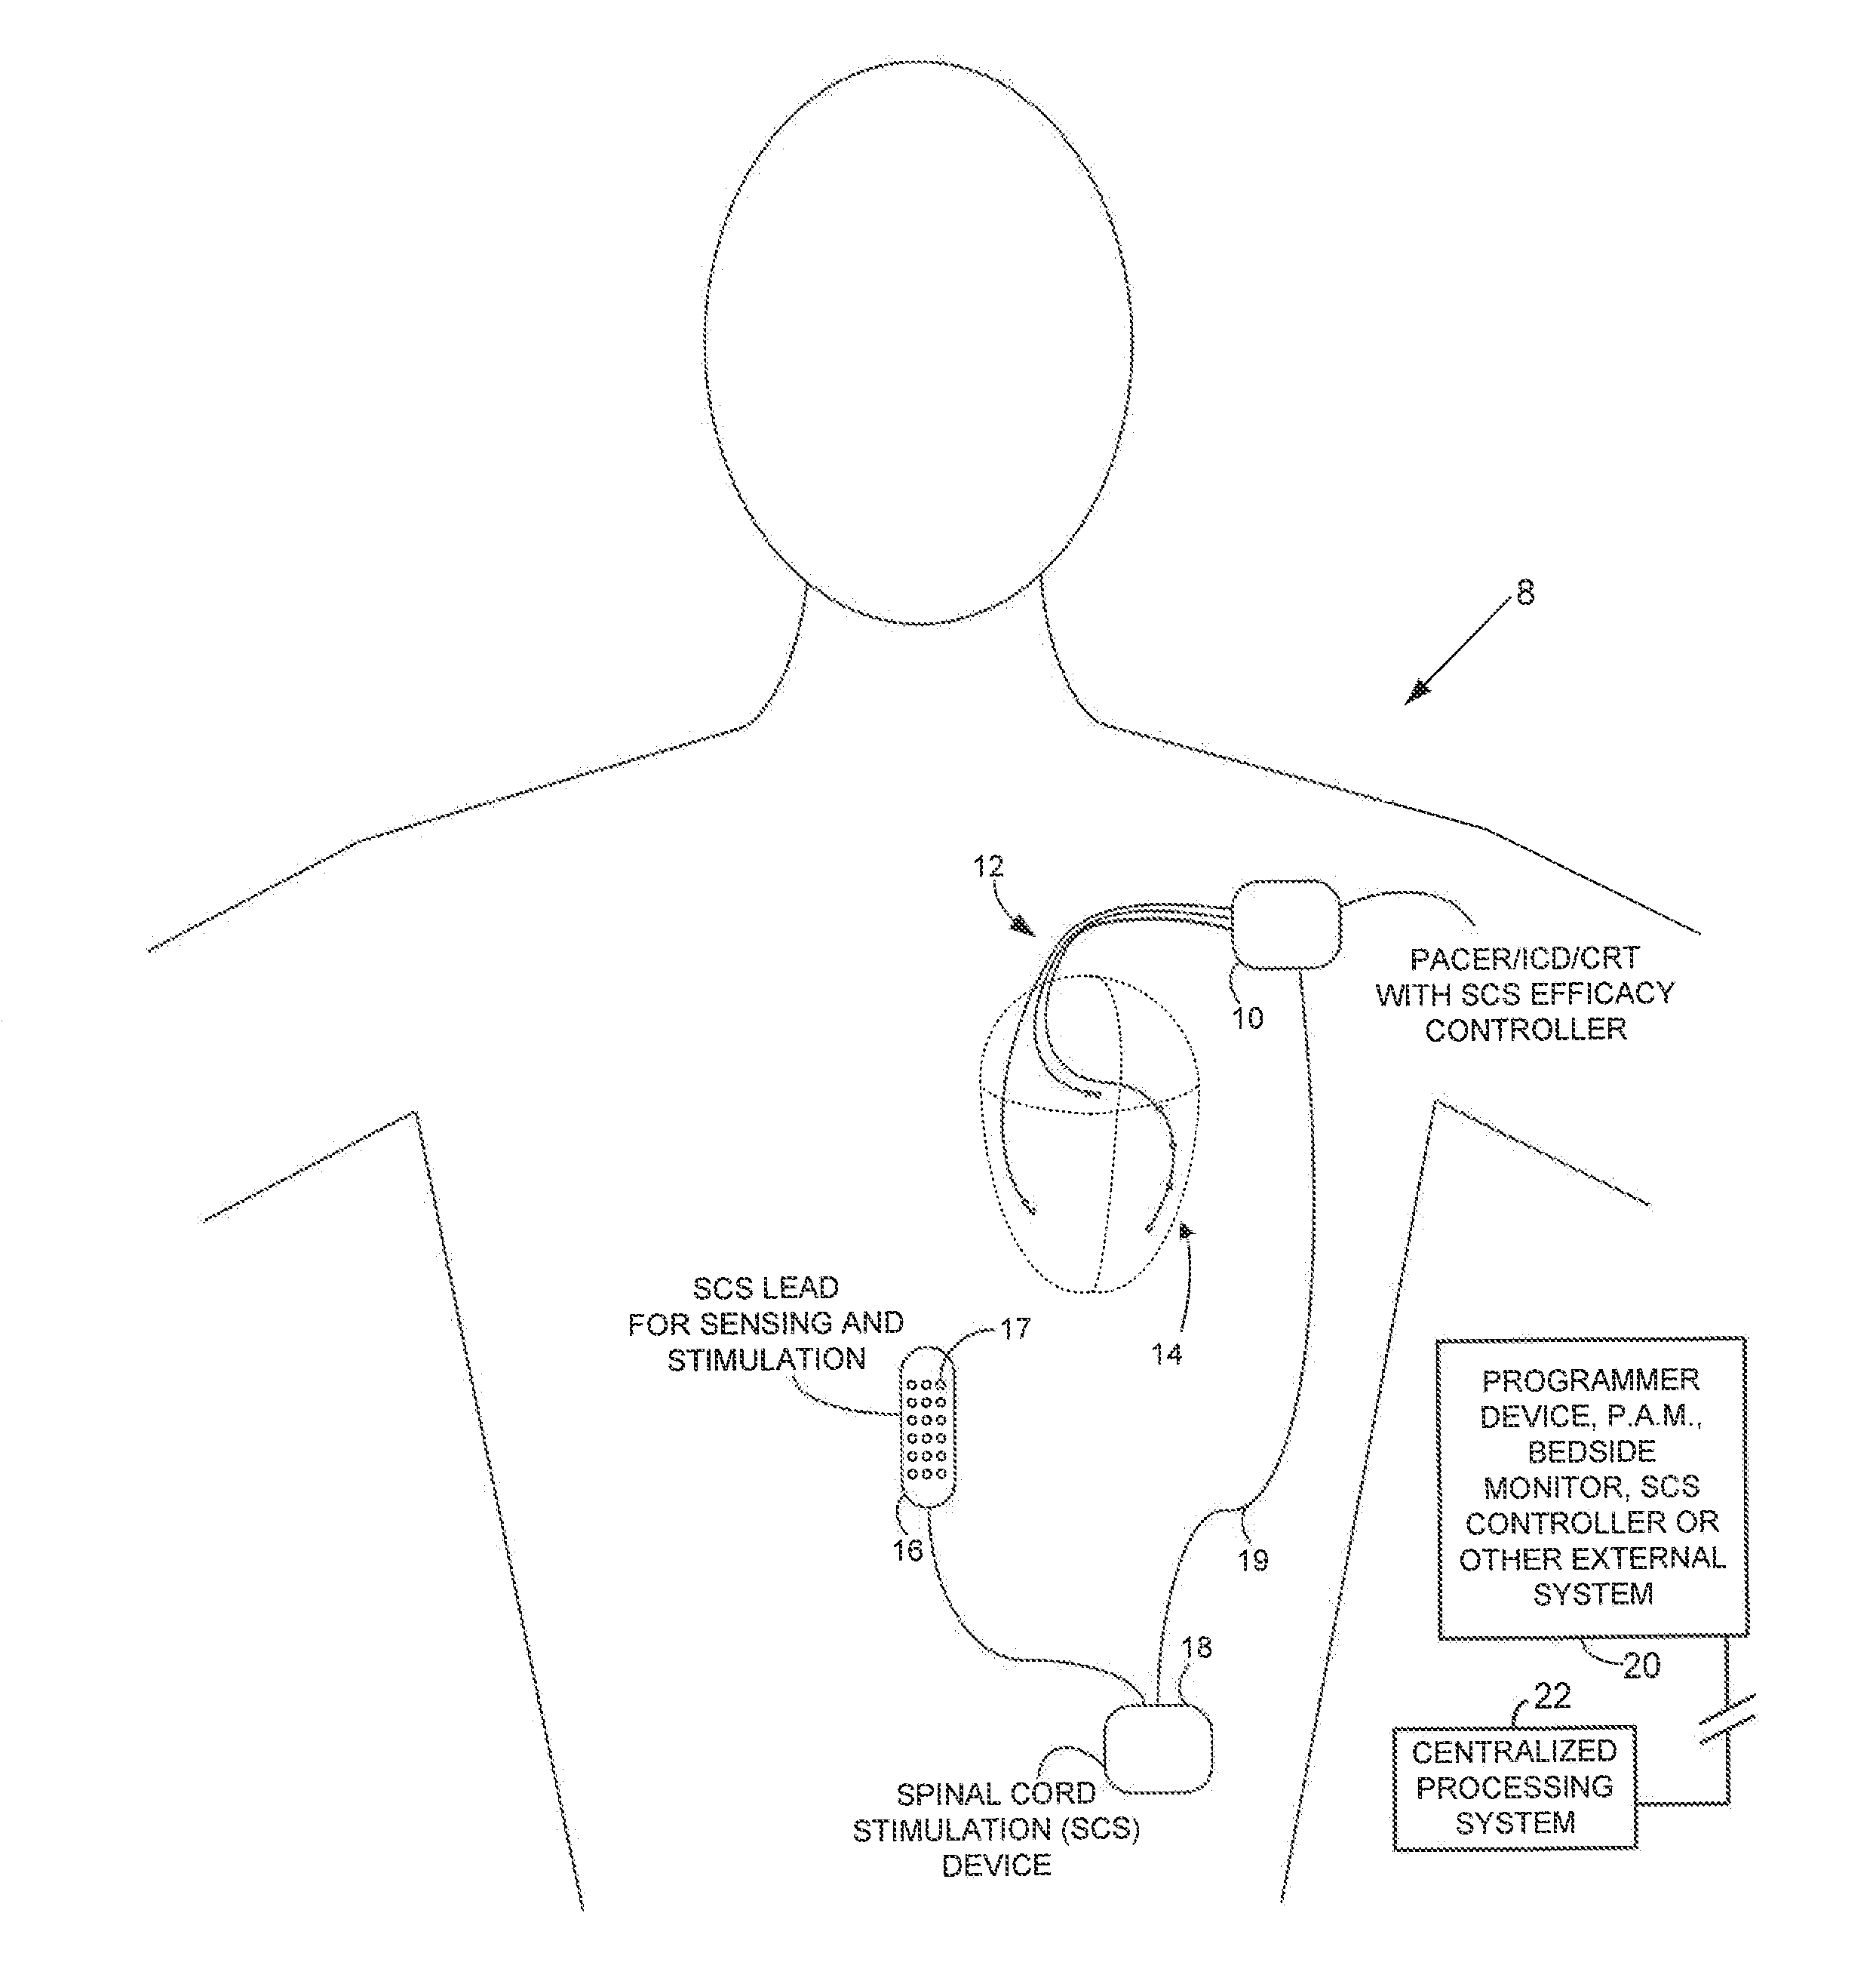 Systems and methods for controlling spinal cord stimulation to improve stimulation efficacy for use by implantable medical devices